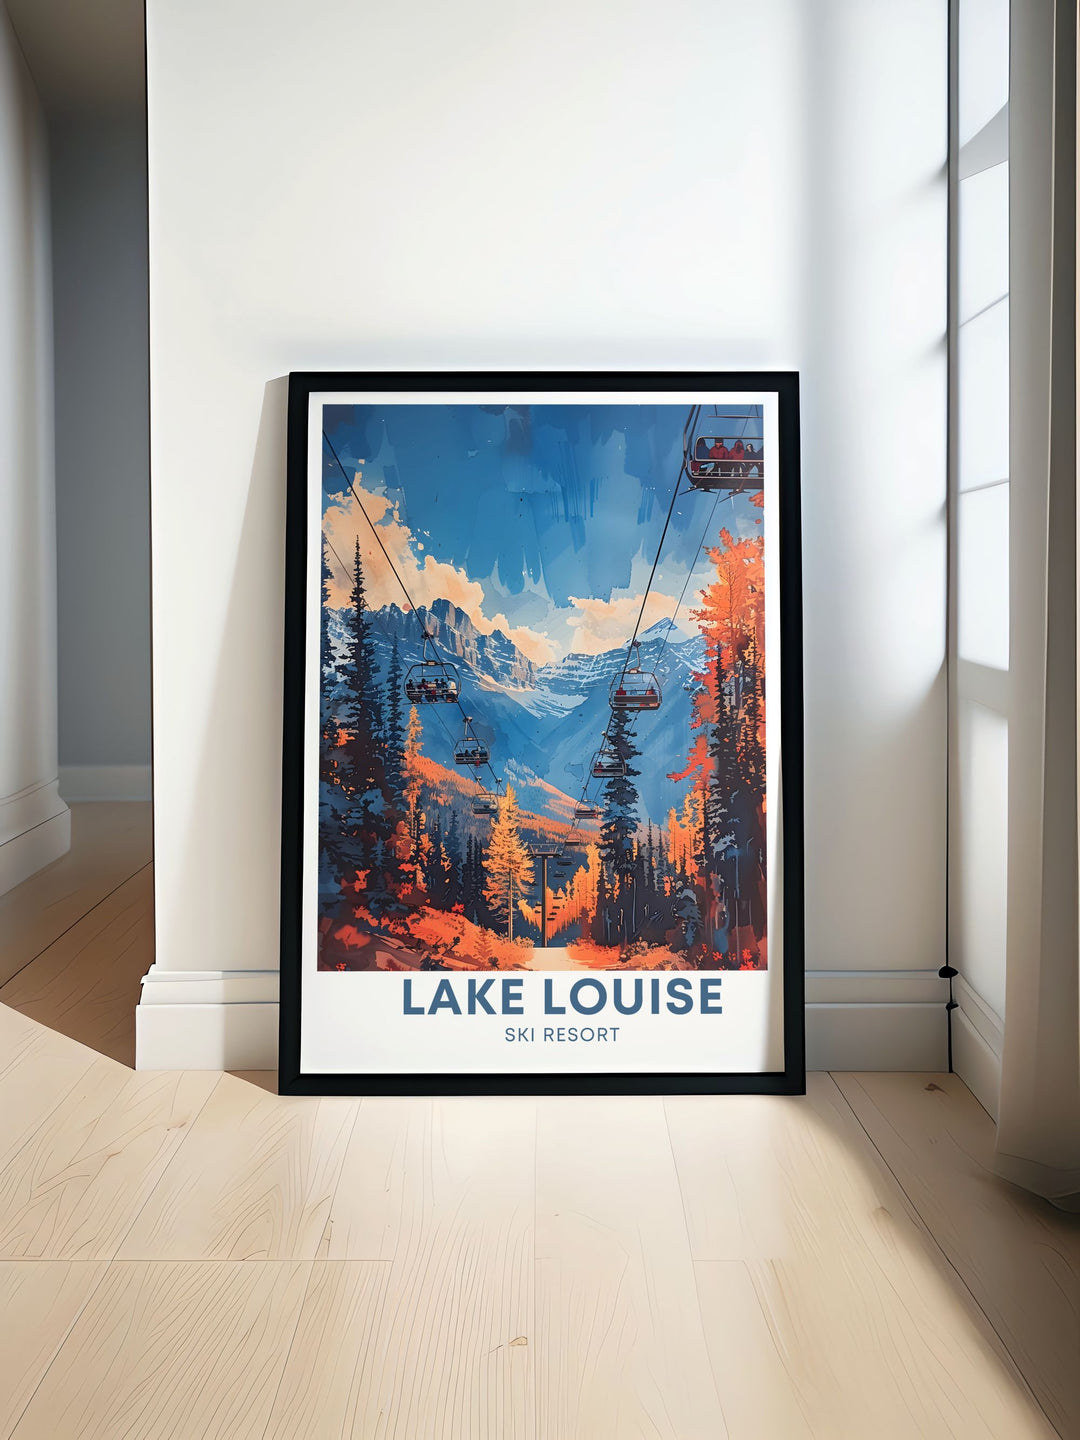 The Top of the World Express lift at Lake Louise Ski Resort is beautifully illustrated in this poster, offering a glimpse into the exhilarating ski adventures and breathtaking views that await visitors in Banff National Park.